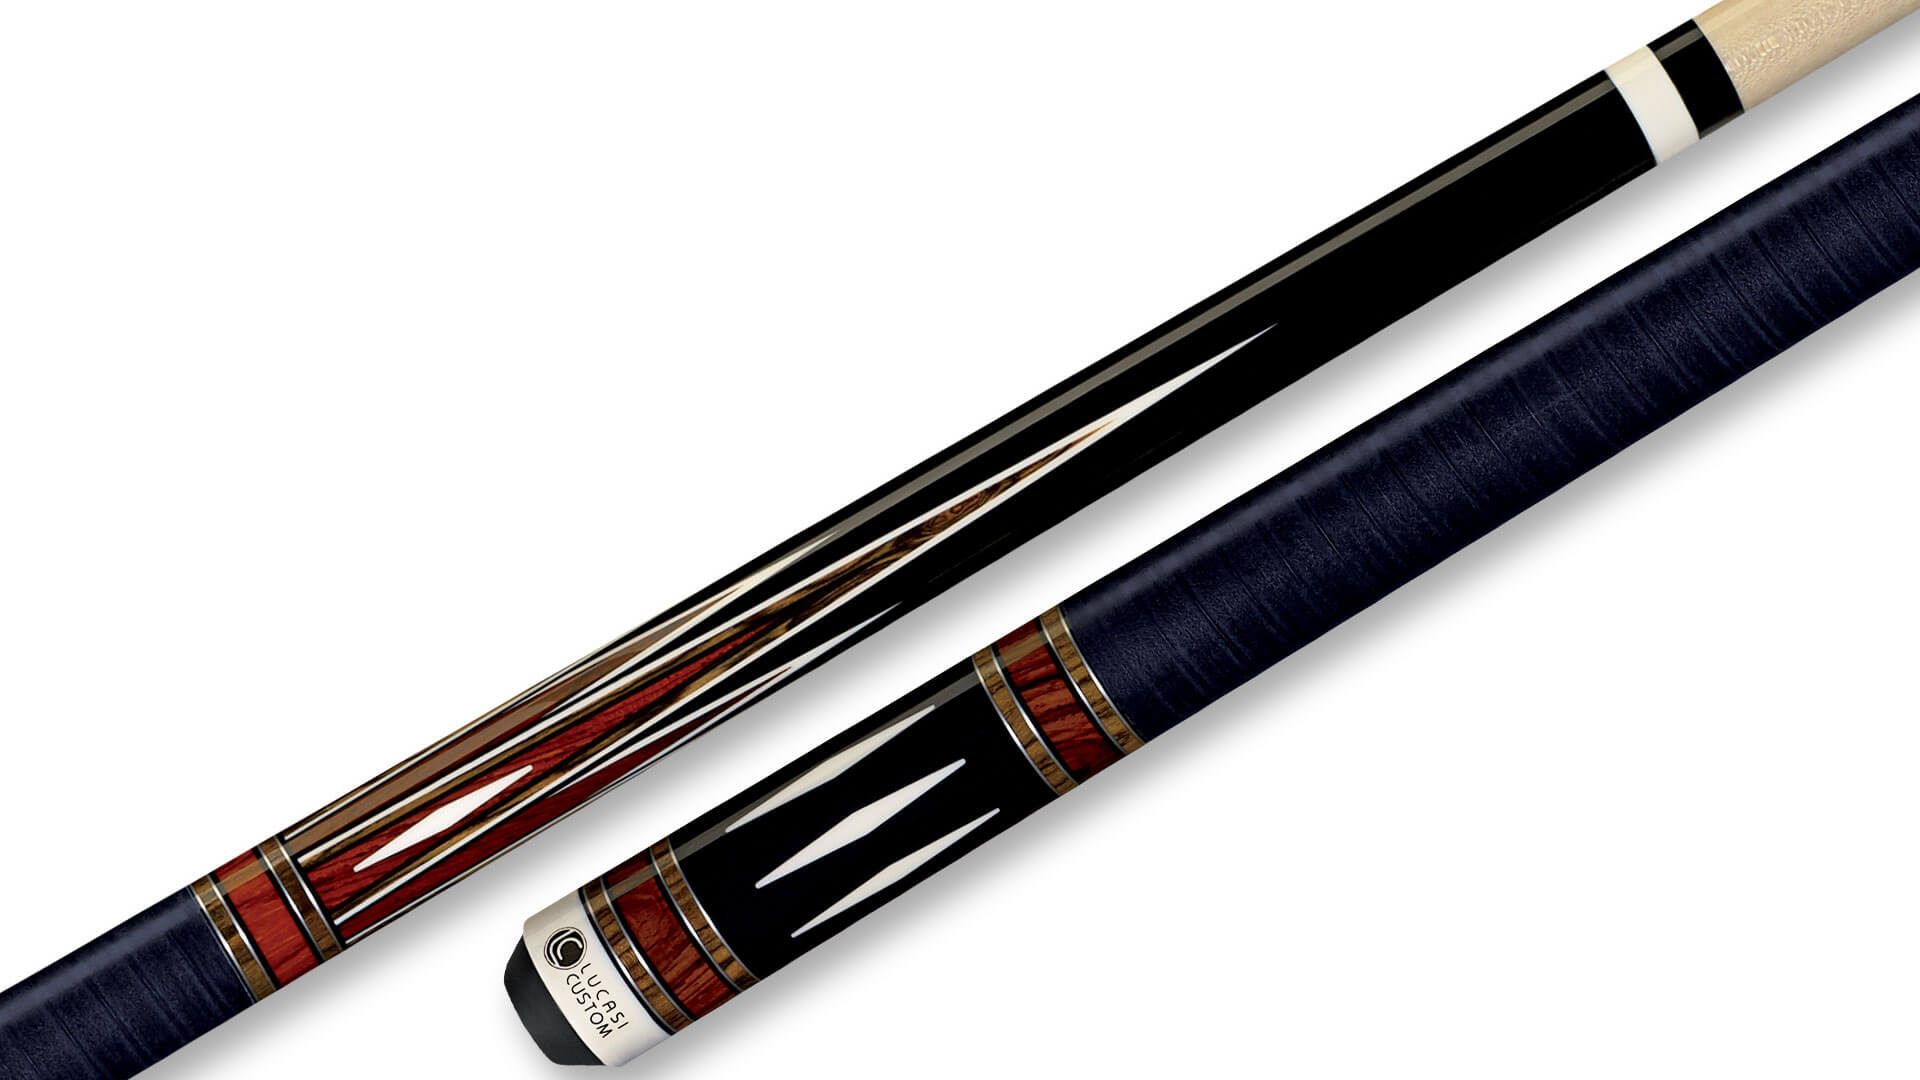 Best Leather Wrap For Pool Cue. There are many different styles